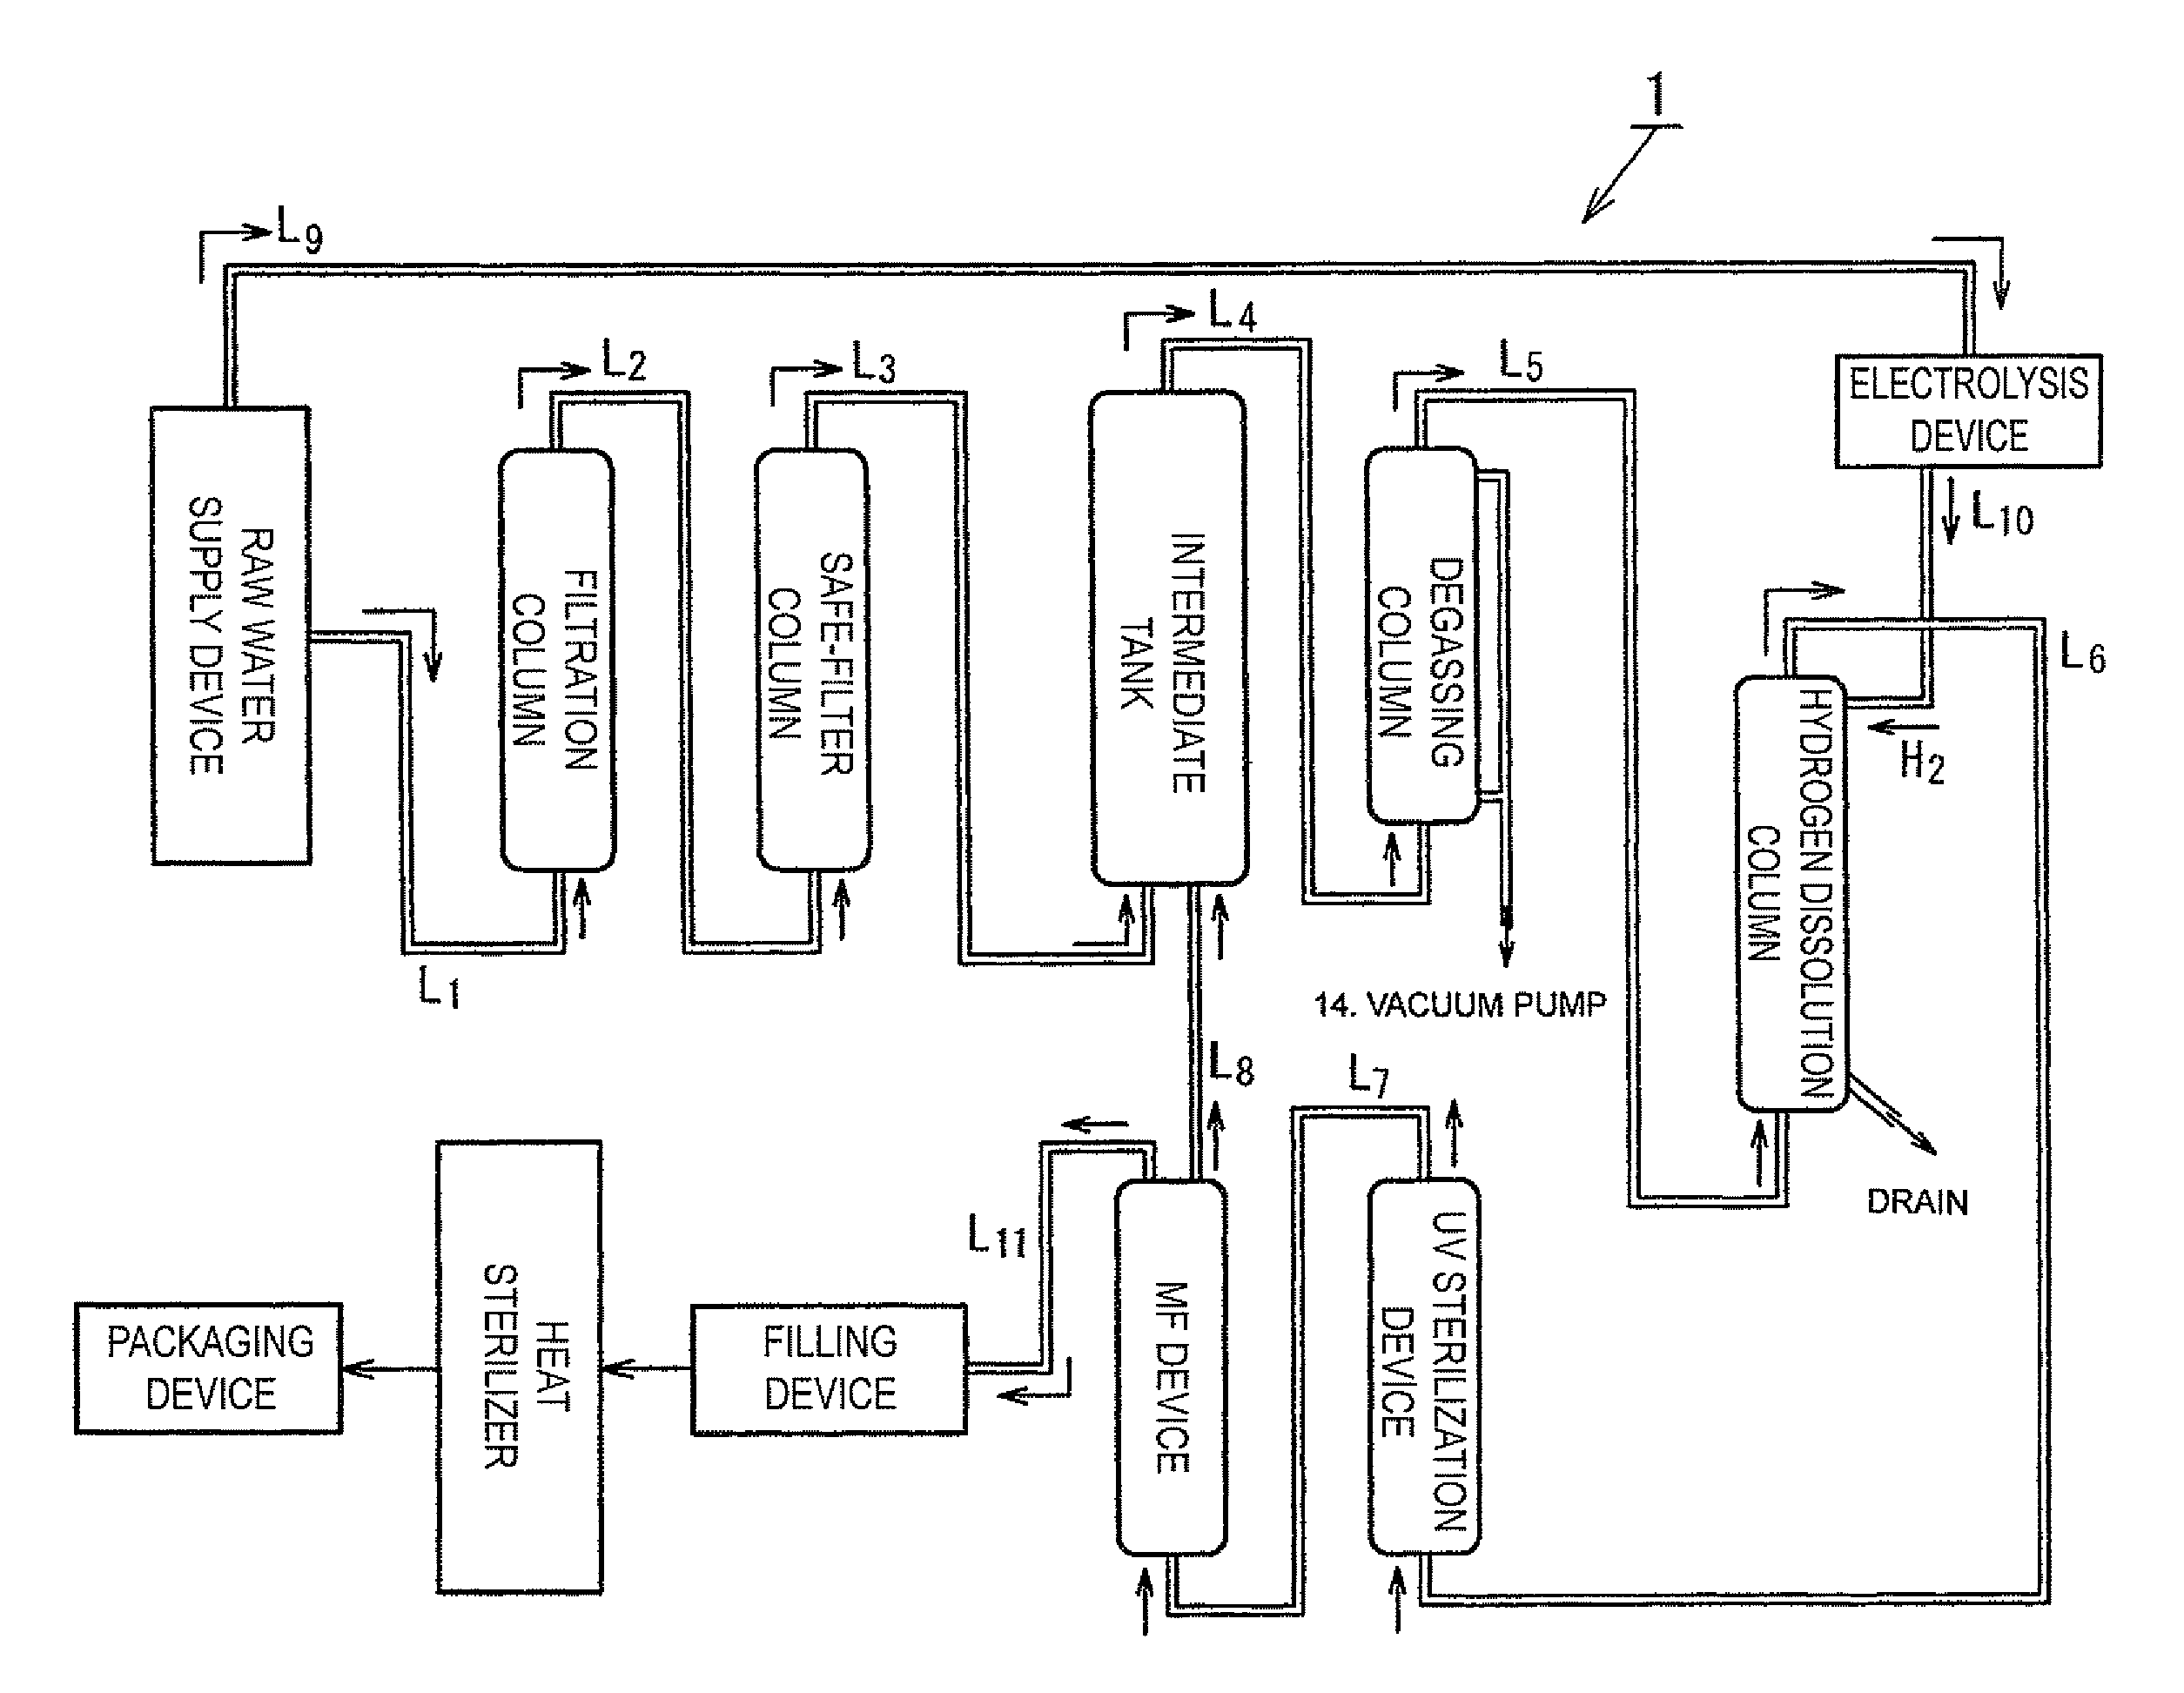 Process for producing hydrogen-containing water for drinking